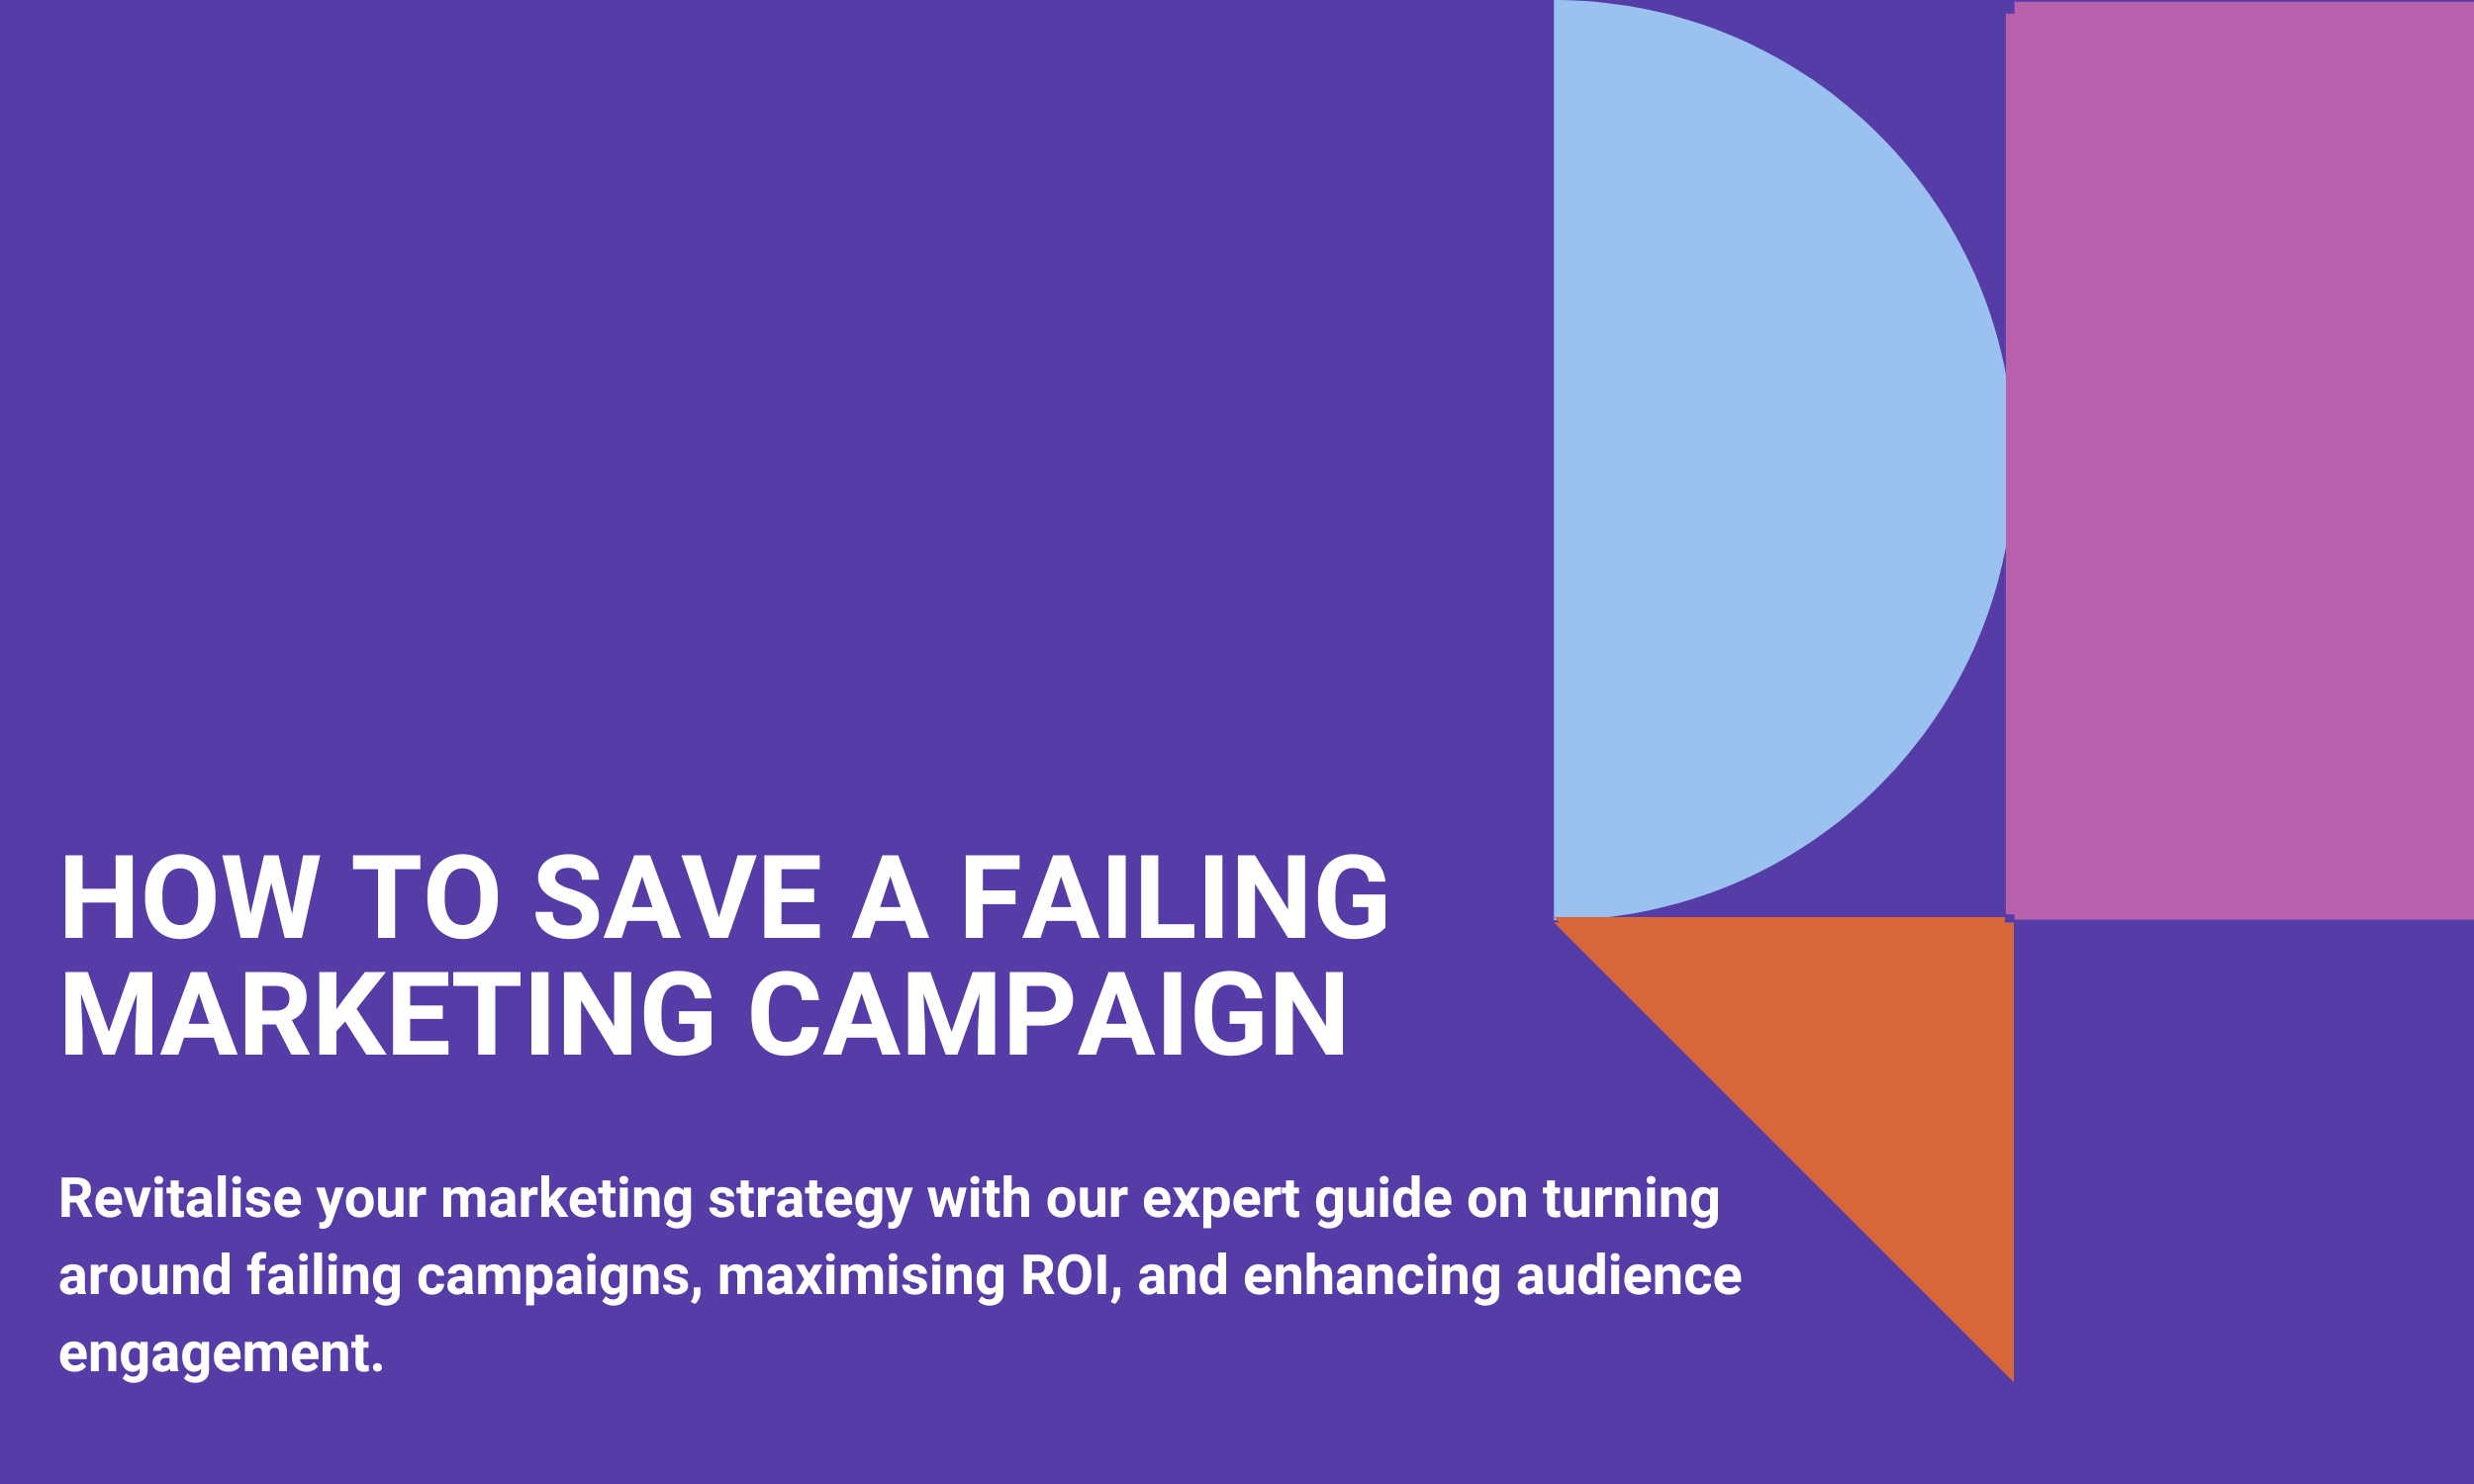 How to Save a Failing Marketing Campaign